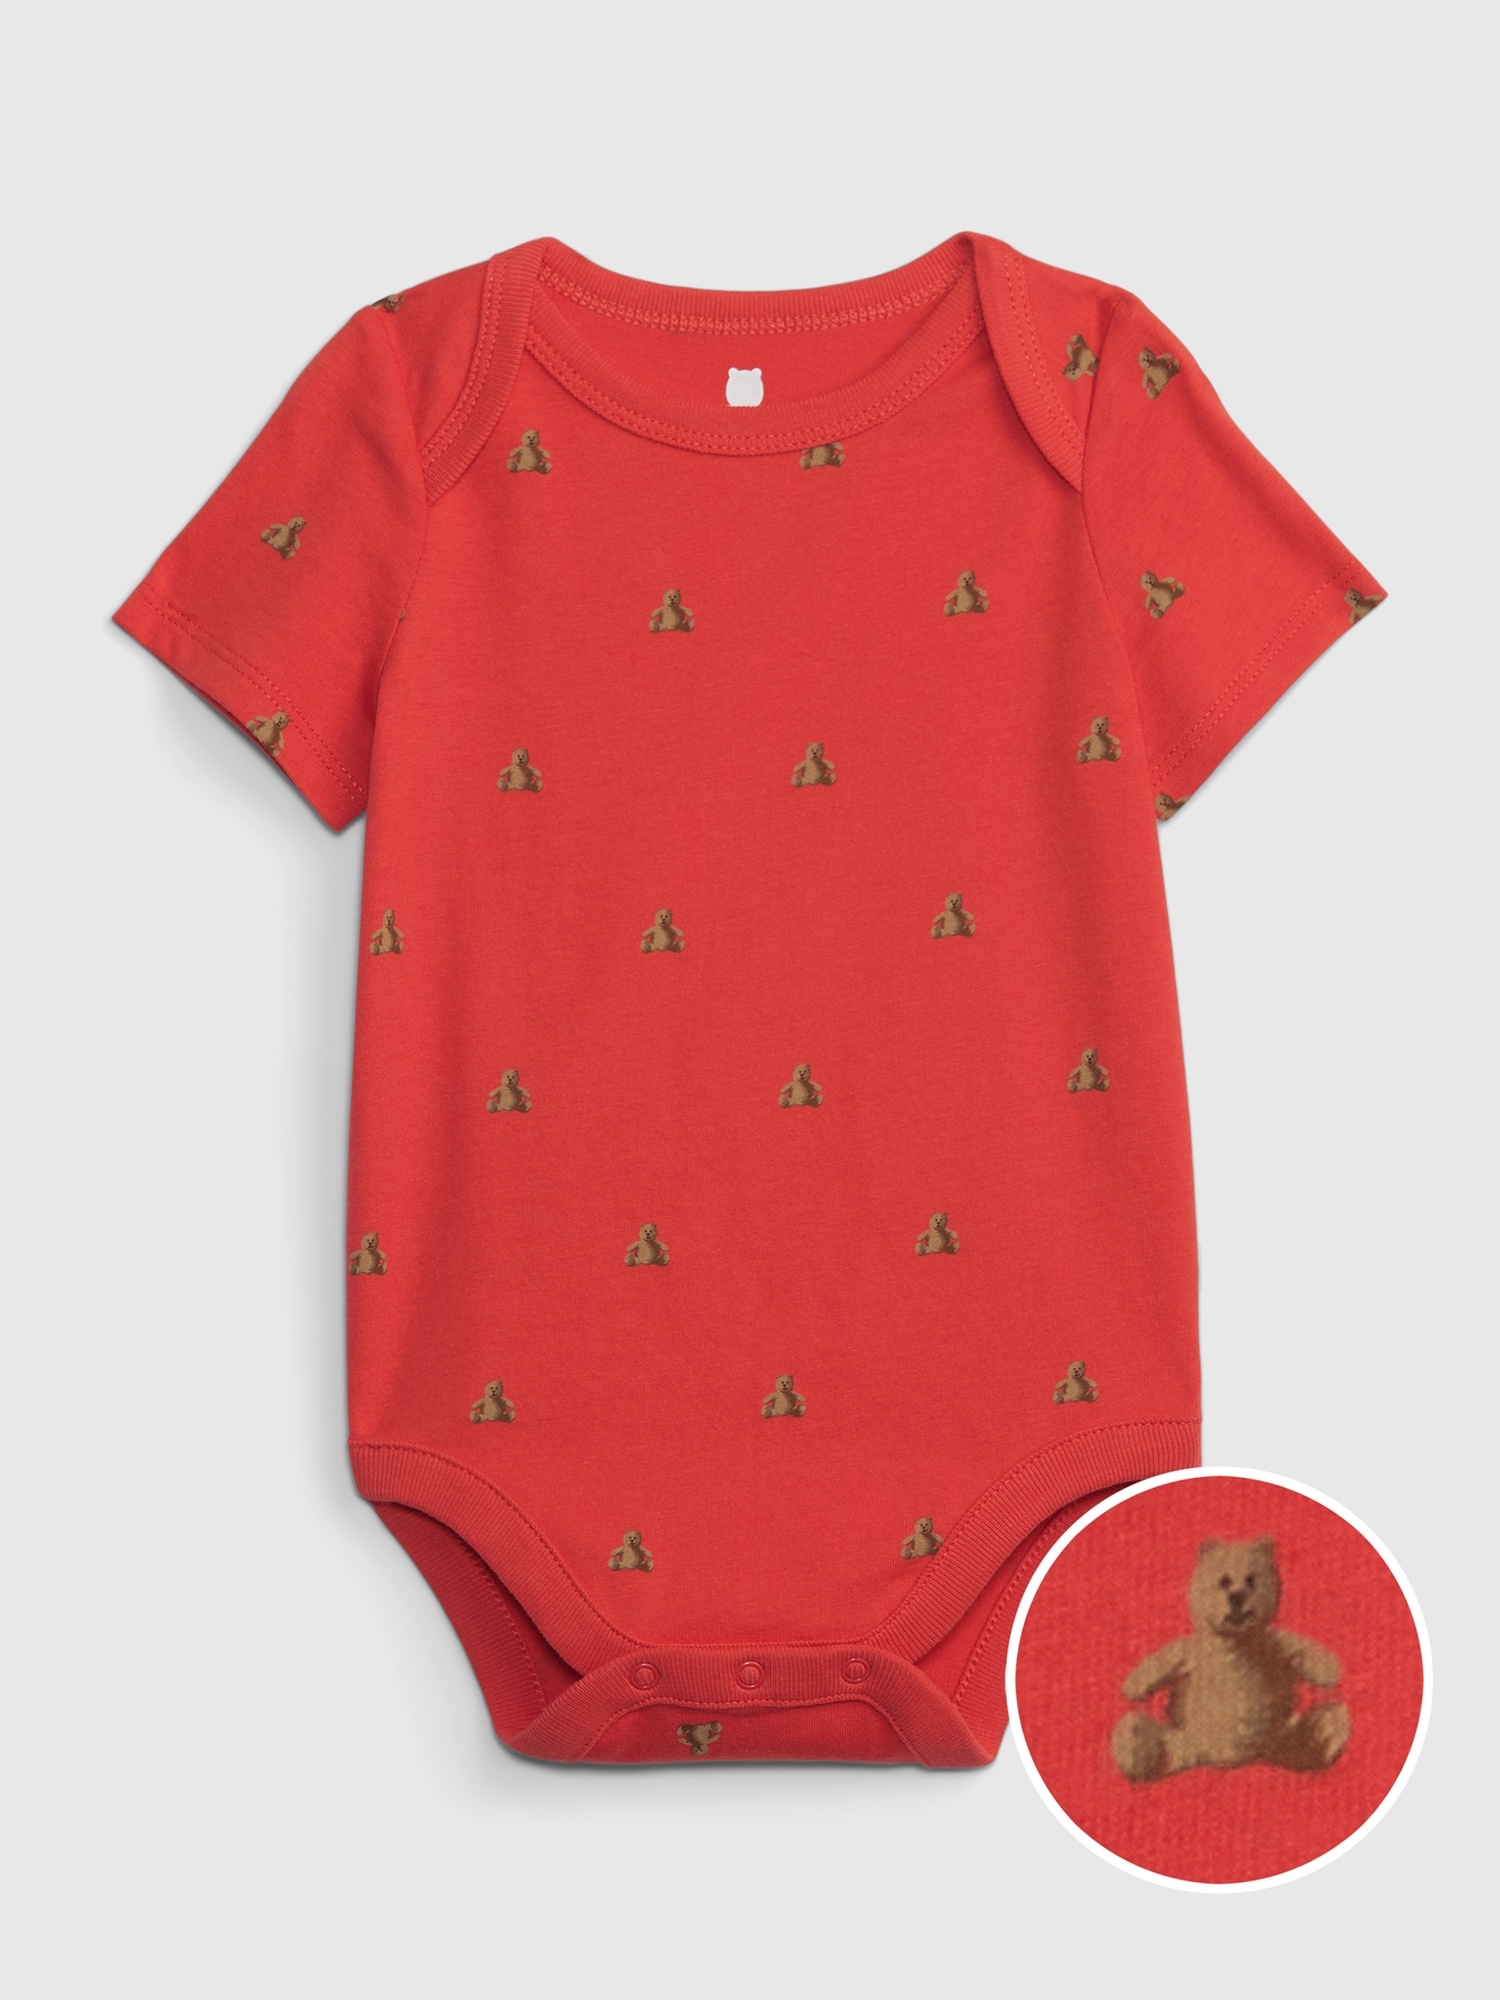 Gap Baby 100% Organic Cotton Mix and Match Graphic Bodysuit red. 1